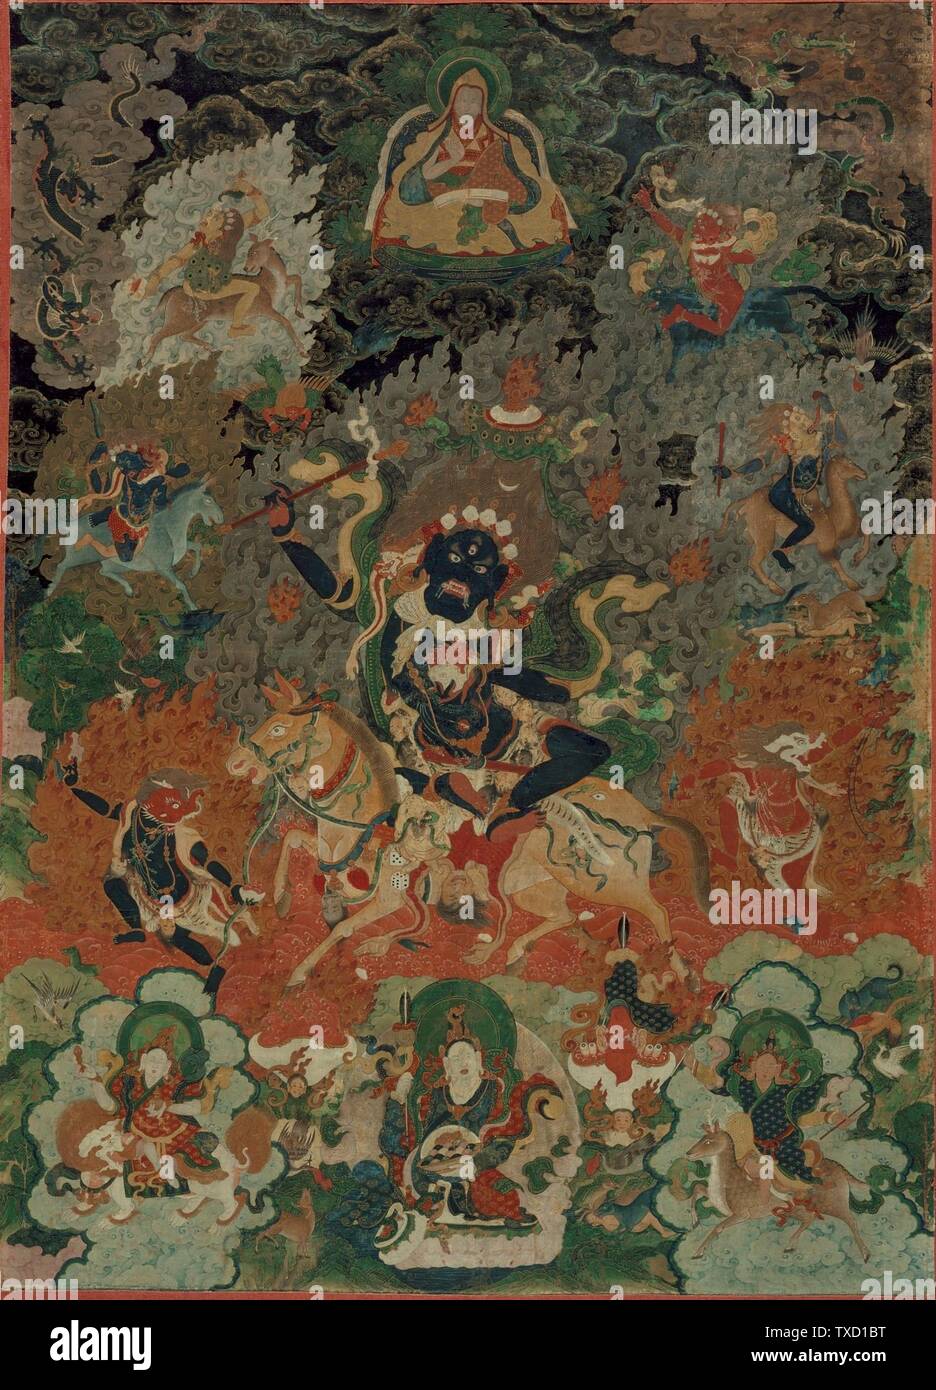 Shri (Palden Lhamo);  Central Tibet, circa 1750-1850 Paintings Mineral pigments and gold on cotton cloth 28 1/2 x 21 1/4 in. (72.39 x 53.98 cm) From the Nasli and Alice Heeramaneck Collection, Museum Associates Purchase (M.83.105.17) South and Southeast Asian Art; between circa 1750 and circa 1850 date QS:P571,+1500-00-00T00:00:00Z/6,P1319,+1750-00-00T00:00:00Z/9,P1326,+1850-00-00T00:00:00Z/9,P1480,Q5727902; Stock Photo